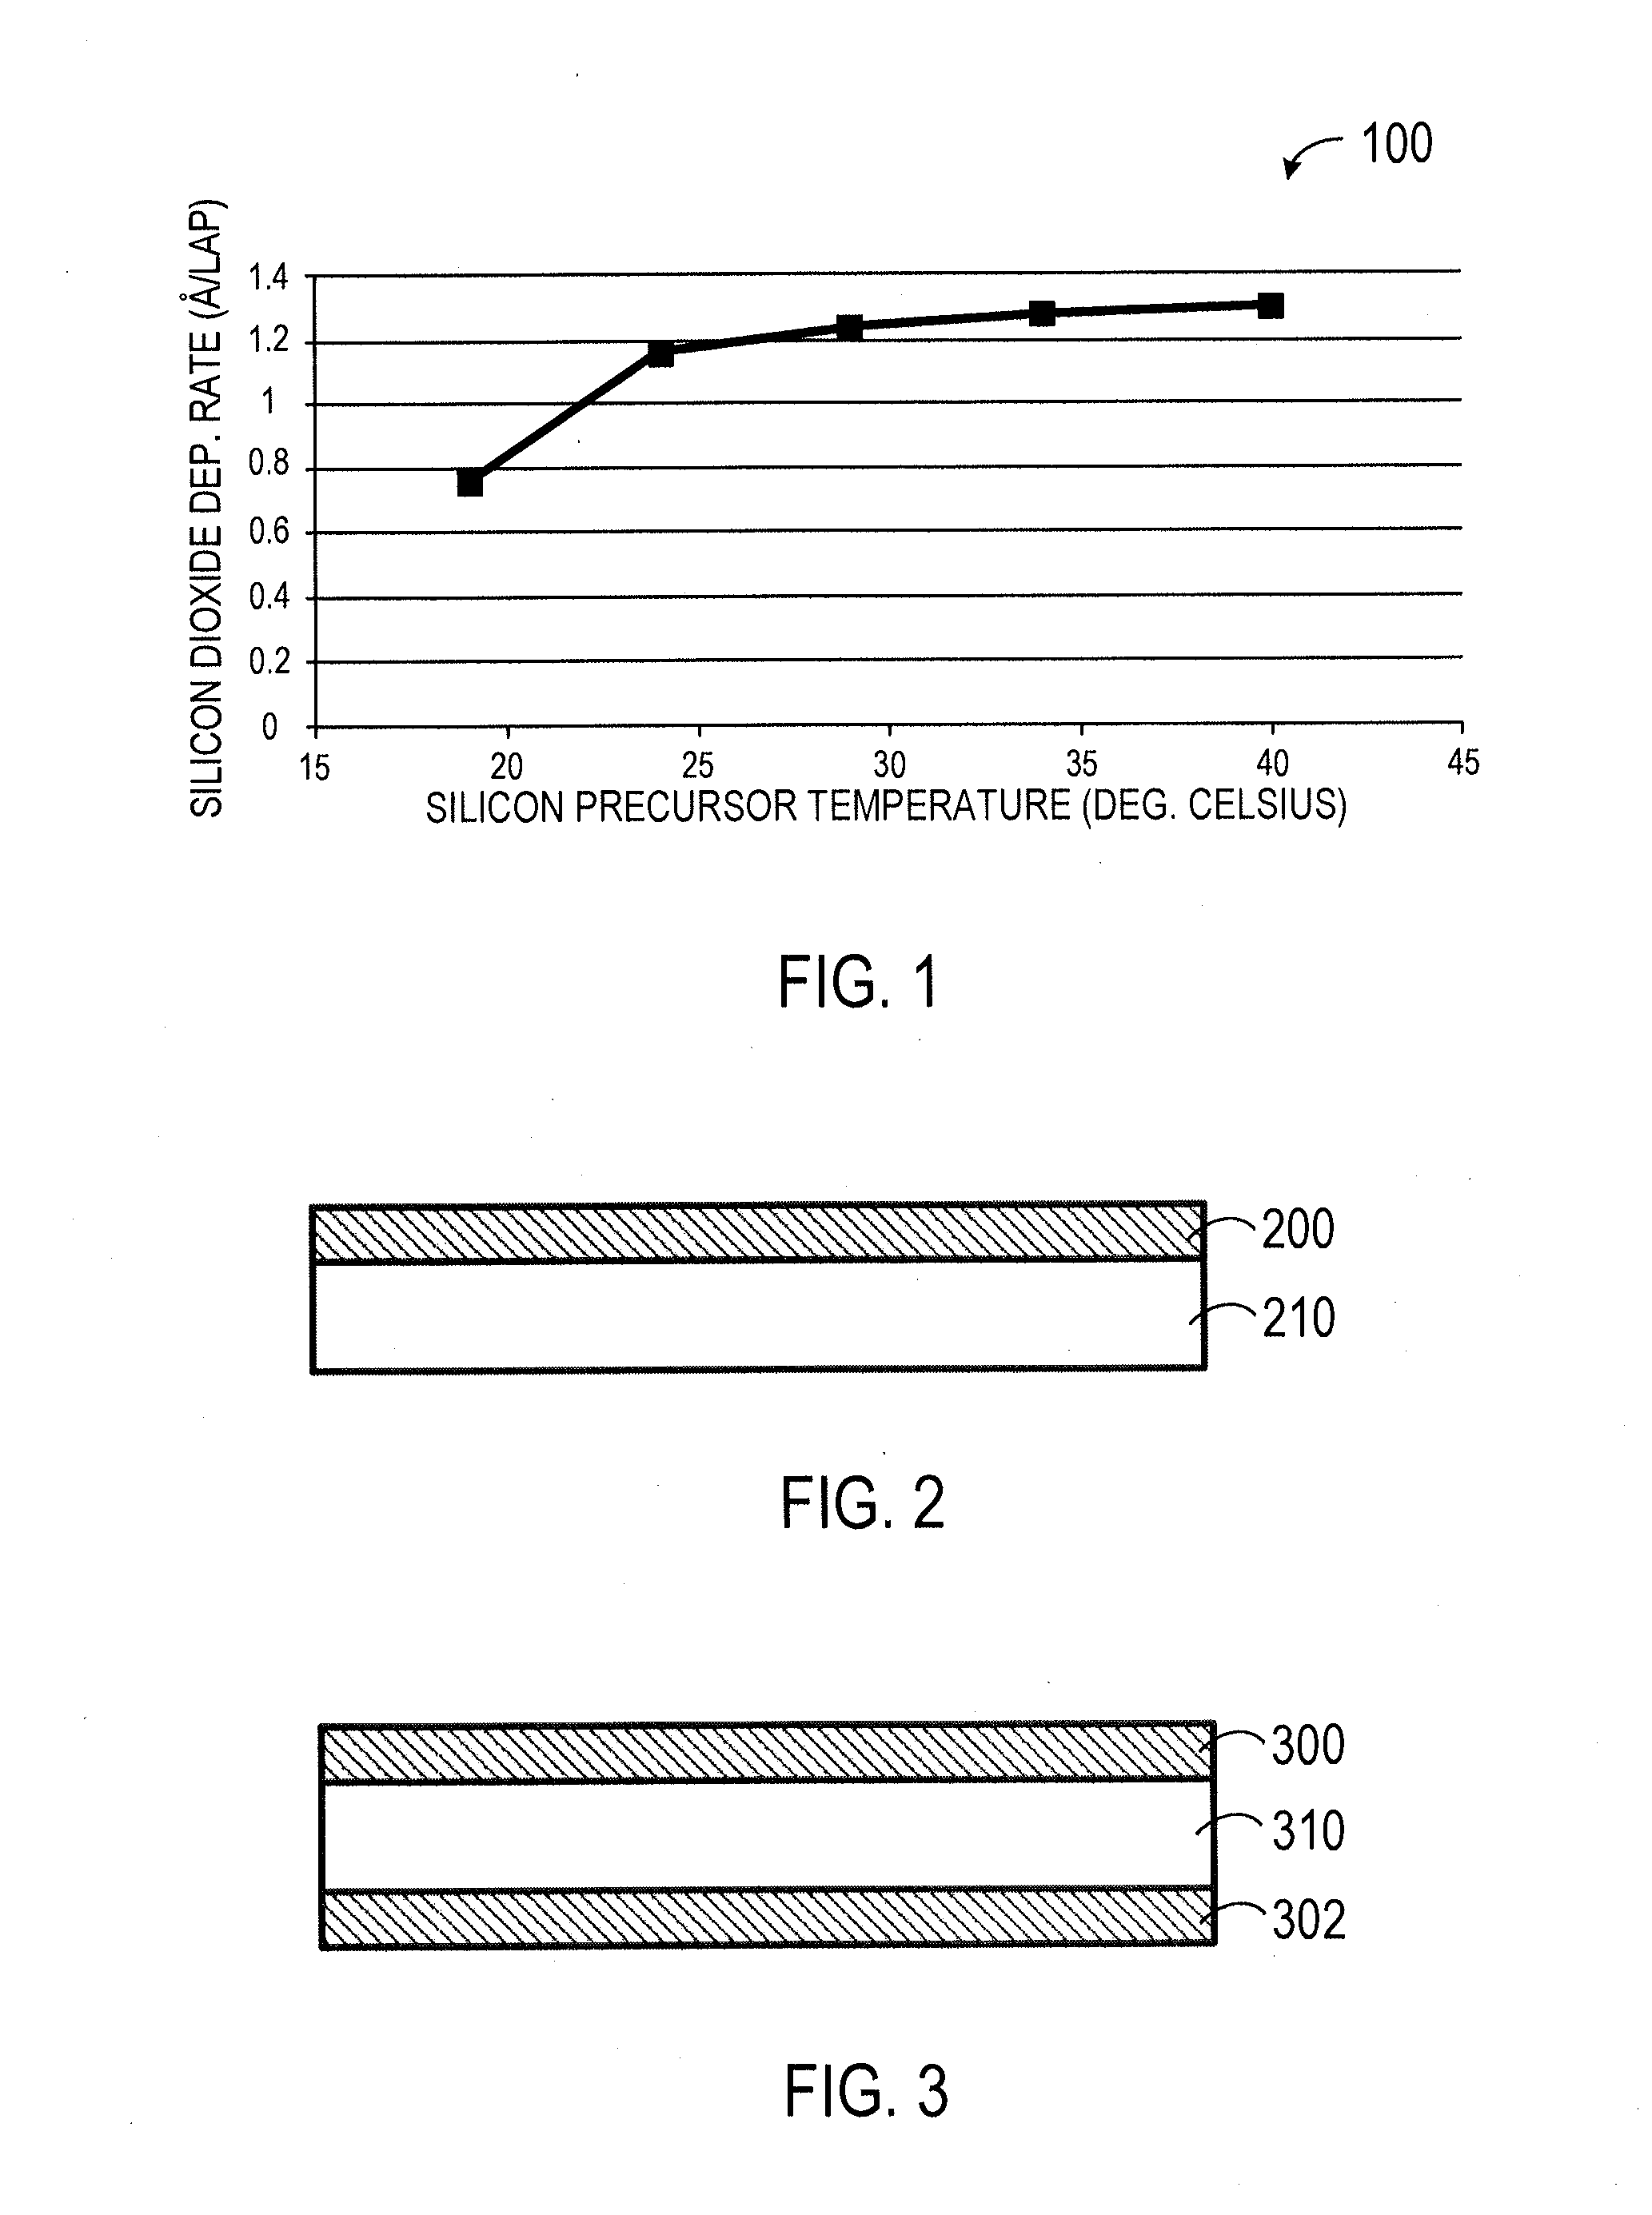 Mixed metal-silicon-oxide barriers